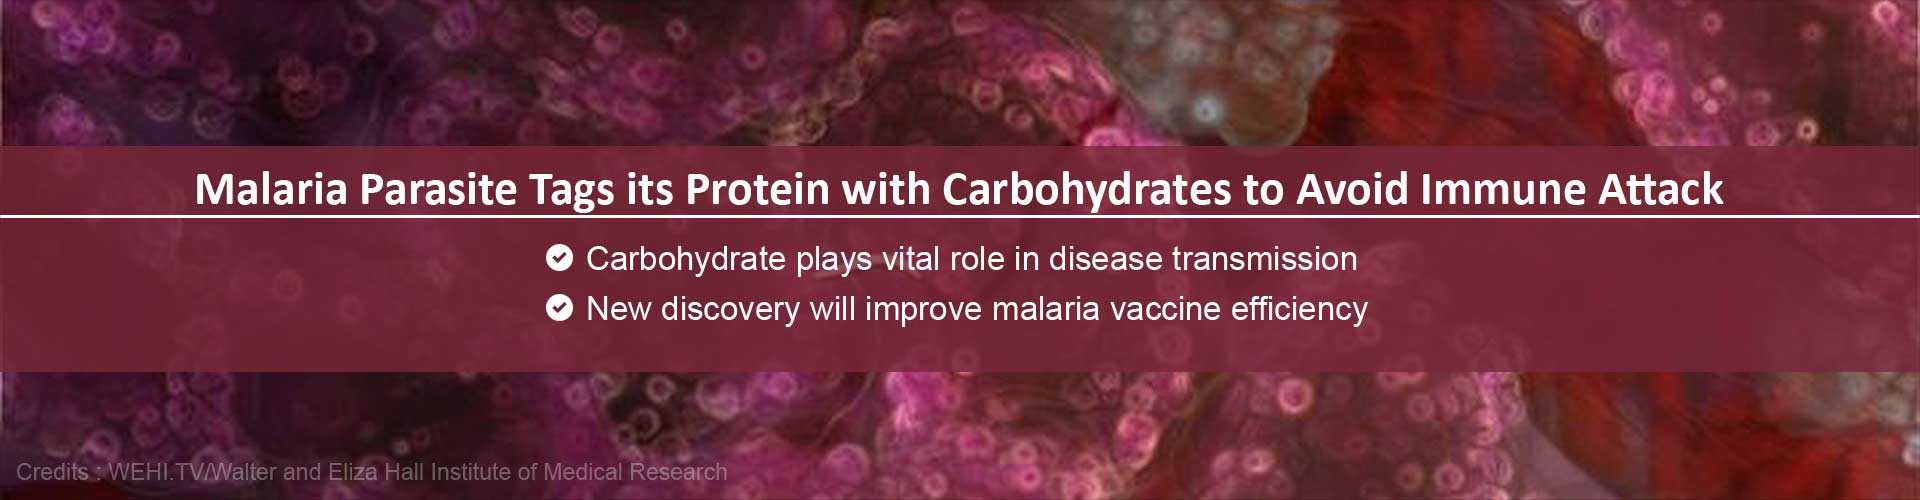 Malaria Parasite Tags its Protein with Carbohydrates to Avoid Immune Attack
- Carbohydrate plays vital role in disease transmission
- New discovery will improve malaria vaccine efficiency